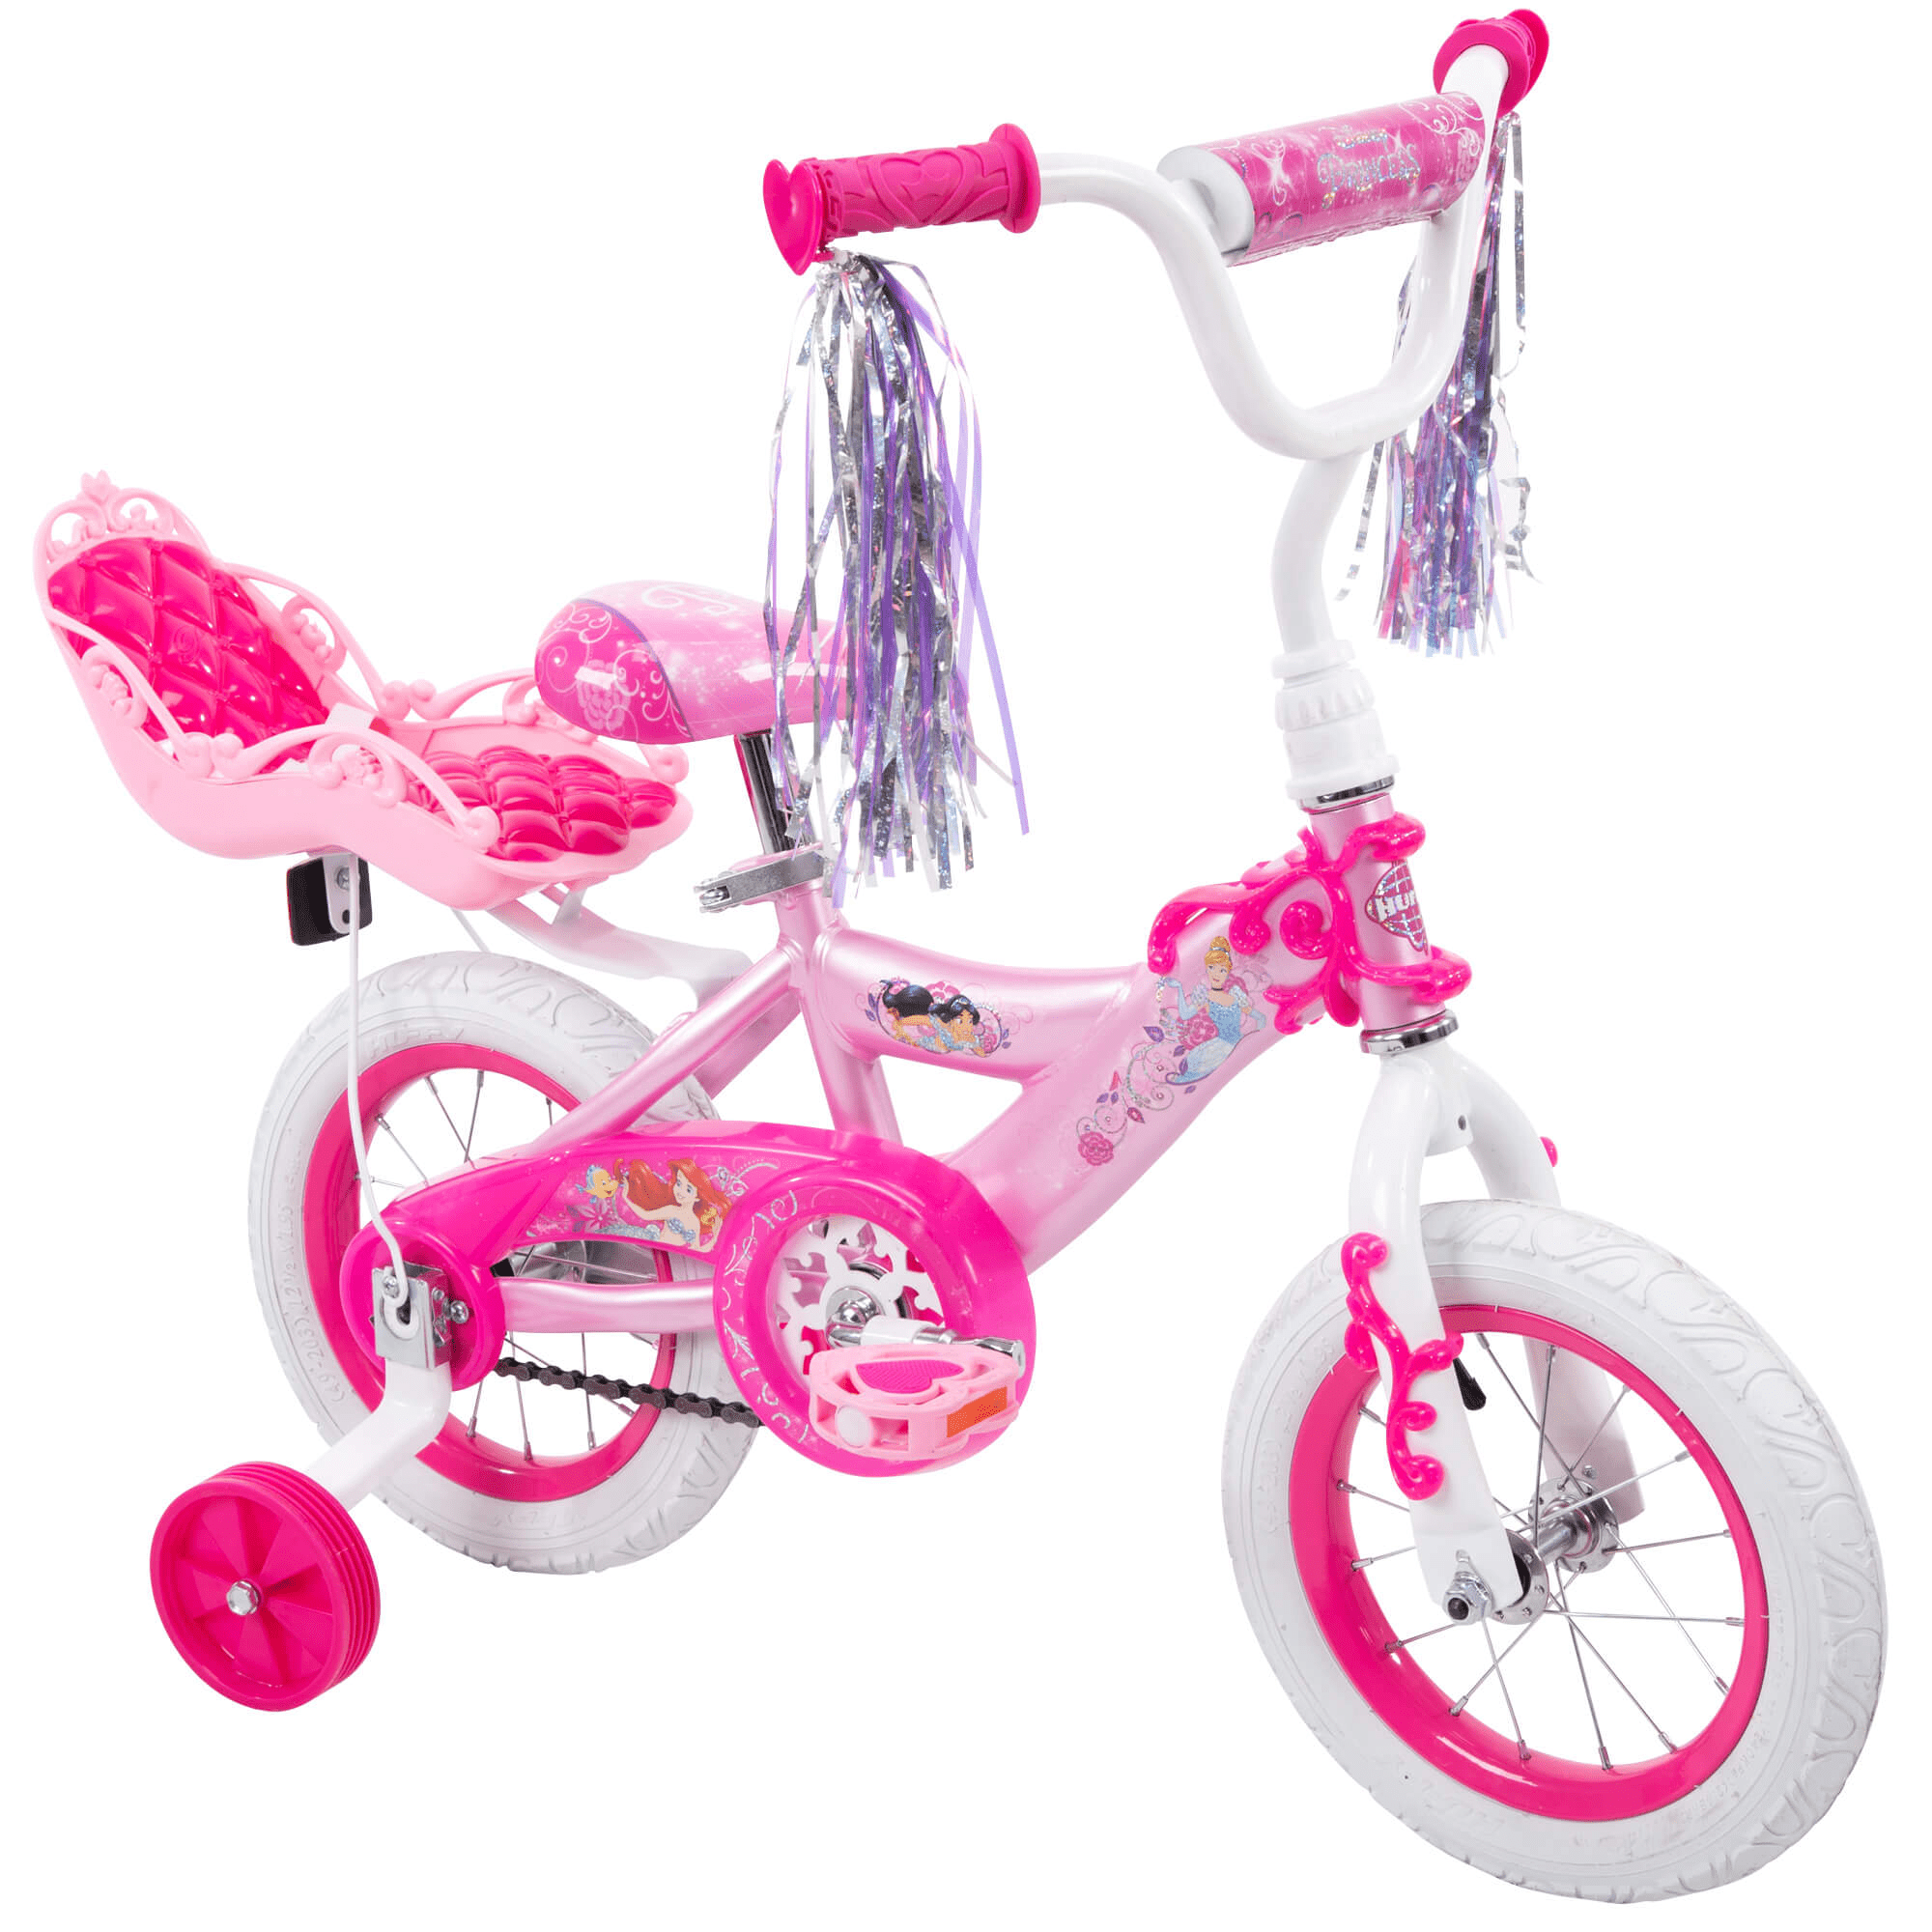 Details about   Huffy Disney Princess Girls Bike Kids Bicycle Doll Carriage Pink 16 inch 2-6 yr 